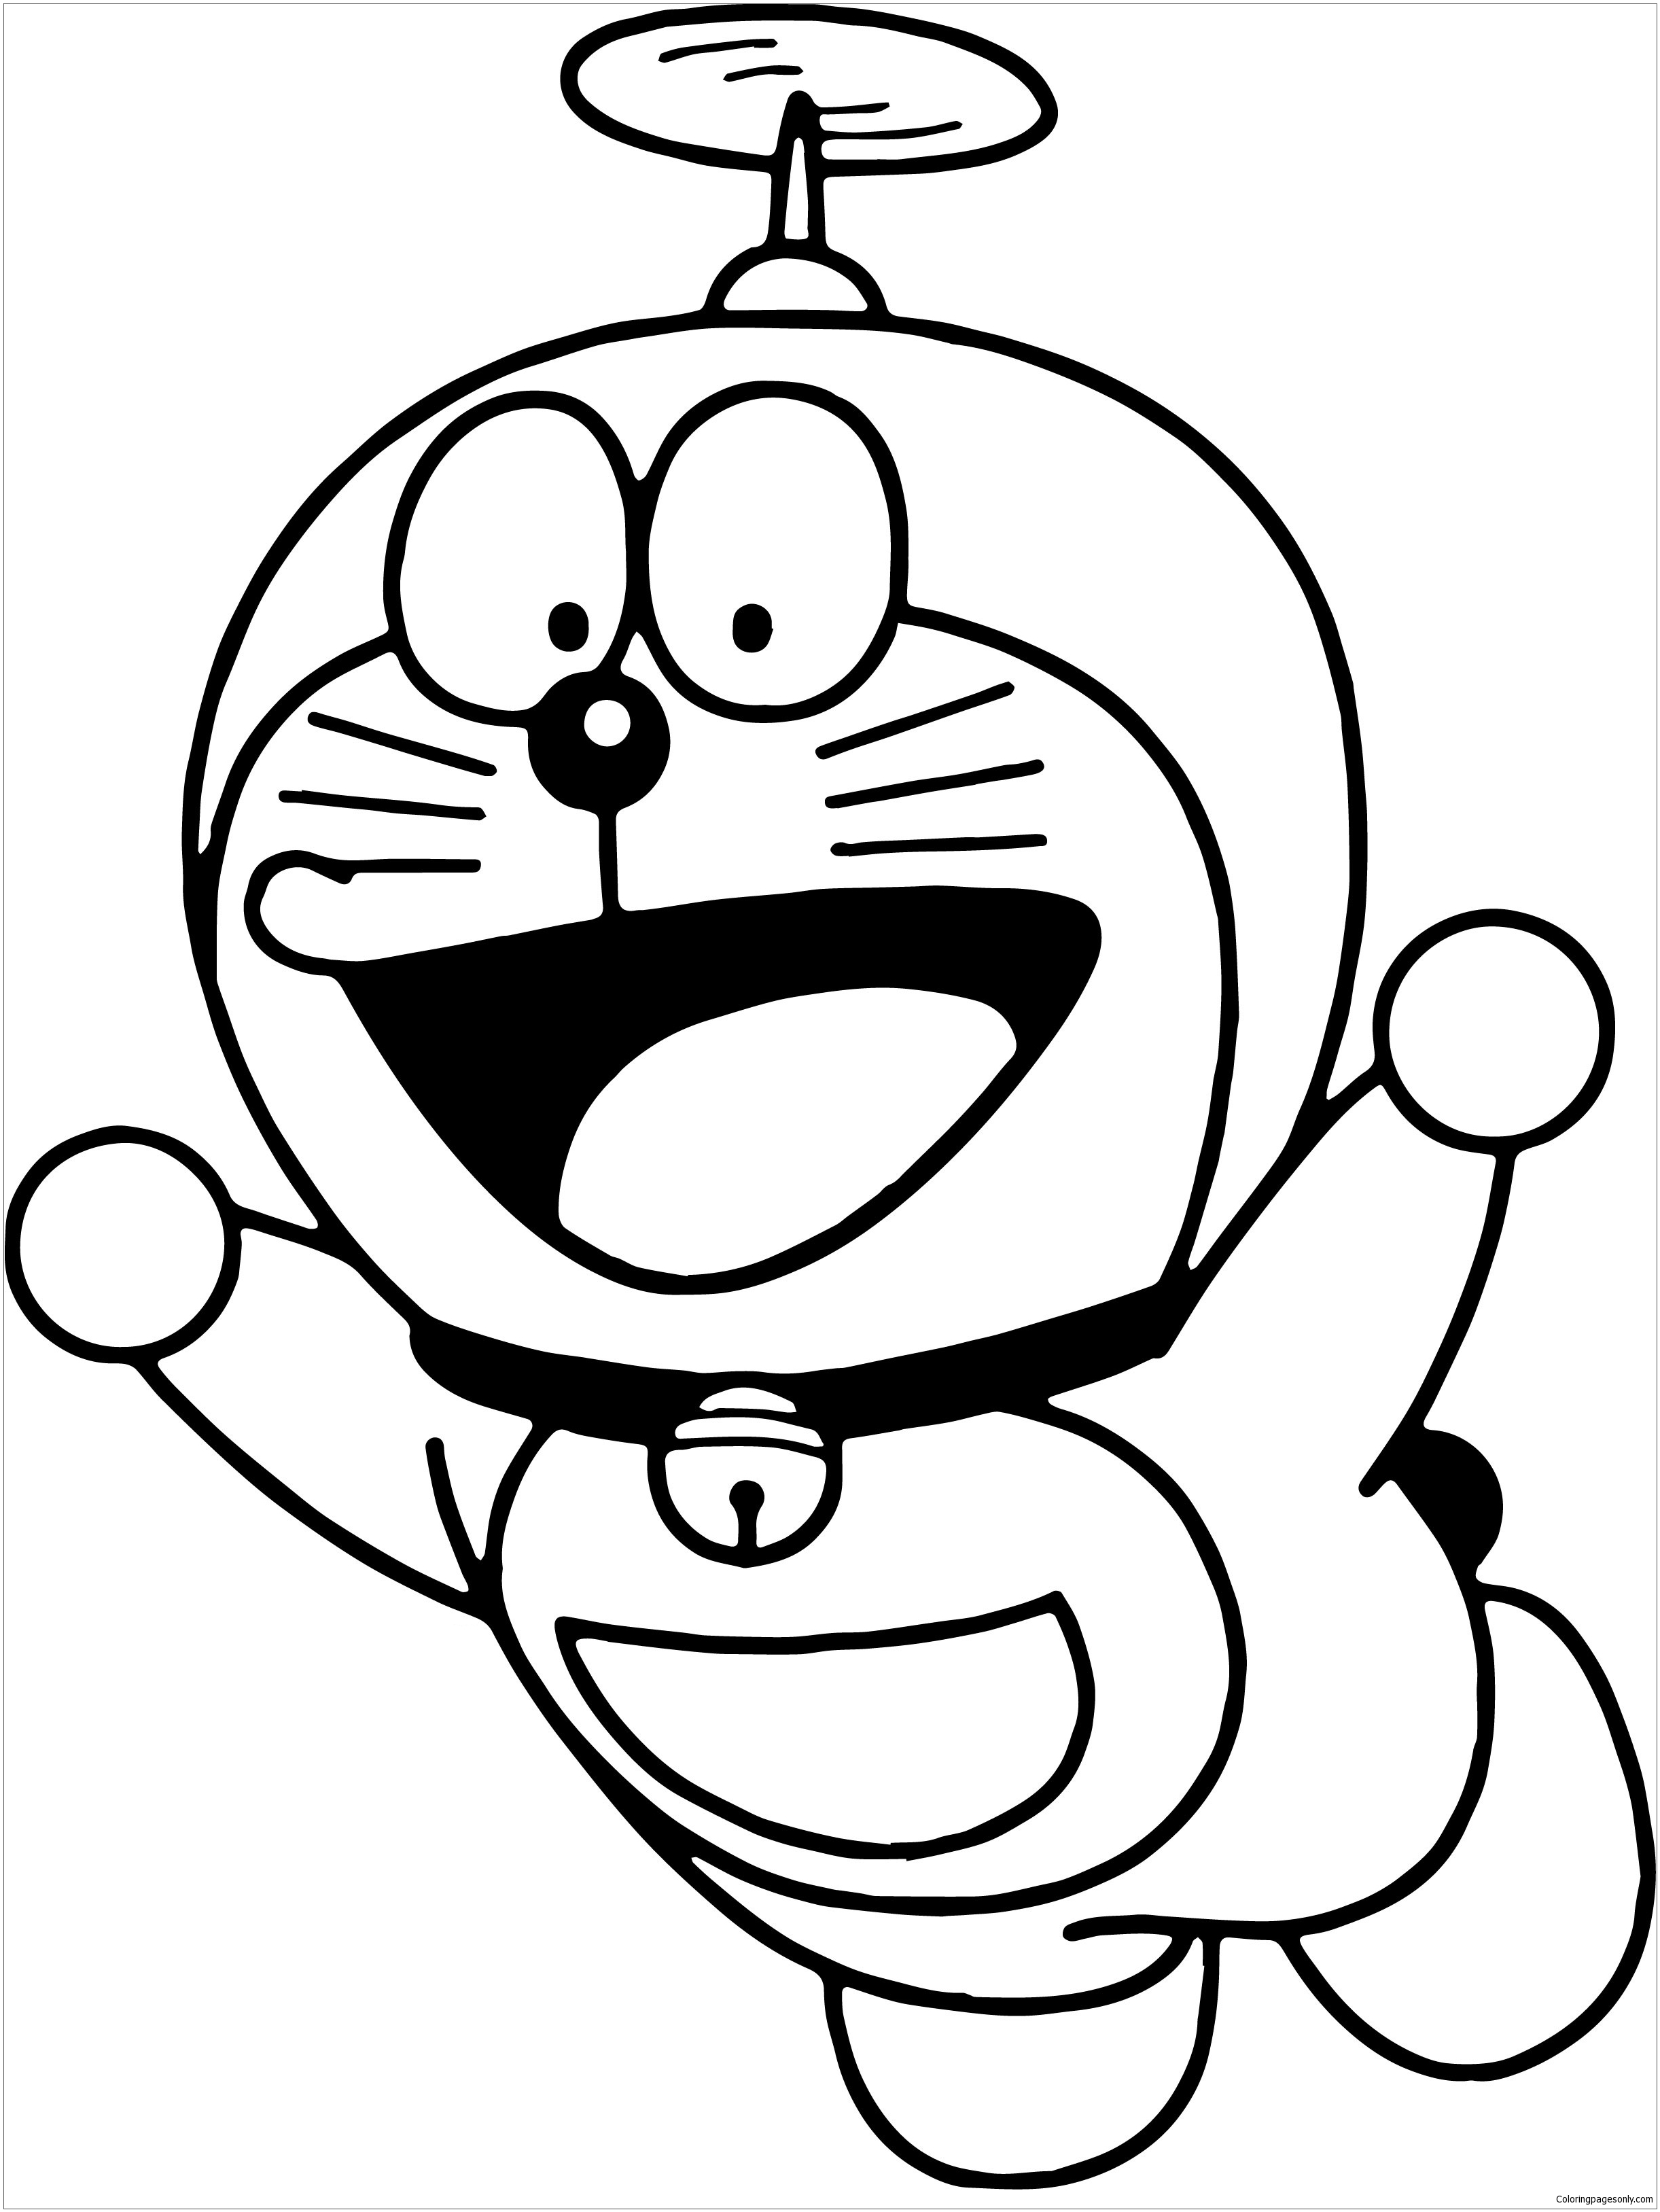 Fly Bratz Doraemon Coloring Page - Free Coloring Pages Online